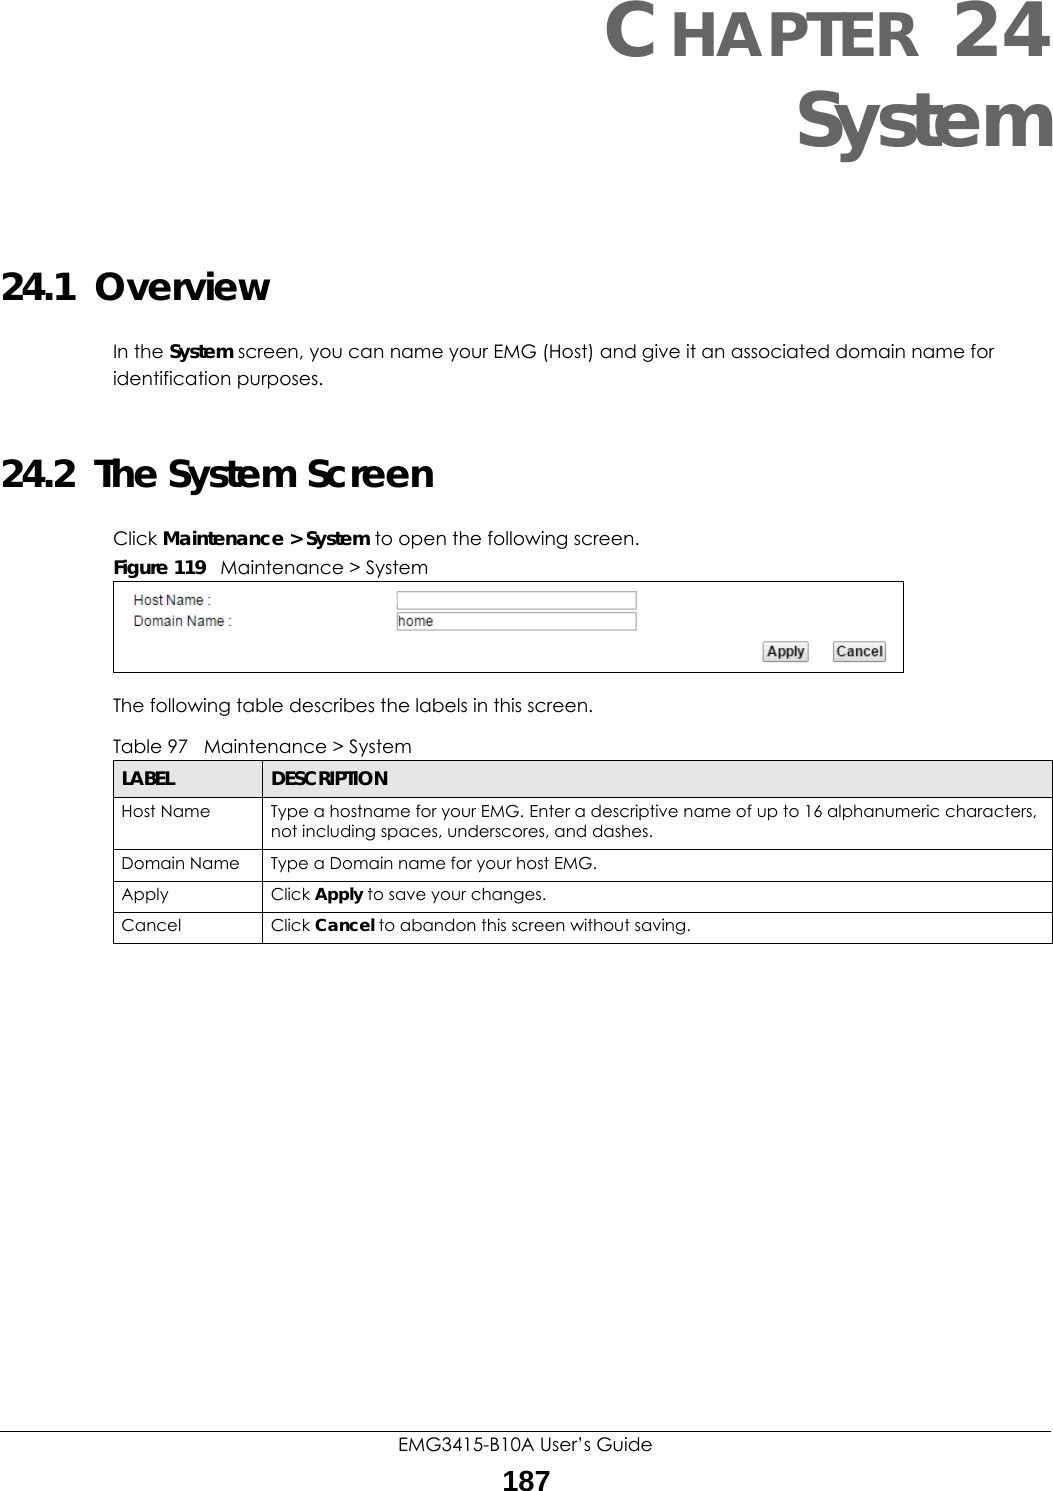 EMG3415-B10A User’s Guide187CHAPTER 24System24.1  OverviewIn the System screen, you can name your EMG (Host) and give it an associated domain name for identification purposes. 24.2  The System ScreenClick Maintenance &gt; System to open the following screen.Figure 119   Maintenance &gt; SystemThe following table describes the labels in this screen. Table 97   Maintenance &gt; SystemLABEL DESCRIPTIONHost Name Type a hostname for your EMG. Enter a descriptive name of up to 16 alphanumeric characters, not including spaces, underscores, and dashes.Domain Name Type a Domain name for your host EMG.Apply Click Apply to save your changes.Cancel Click Cancel to abandon this screen without saving.